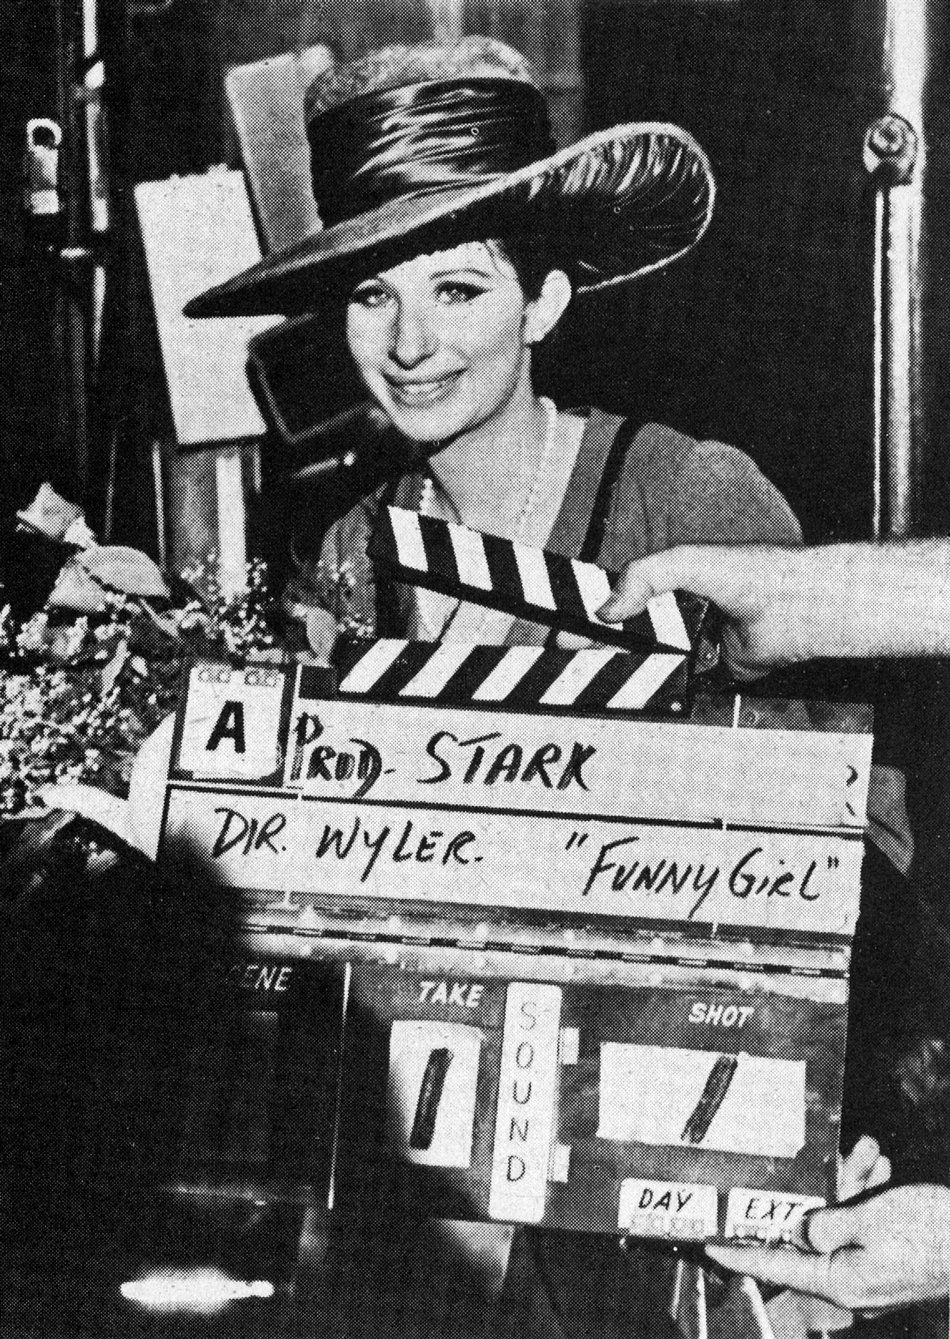 Streisand on set the first day. The clapperboard reads: Take 1, Shot 1.